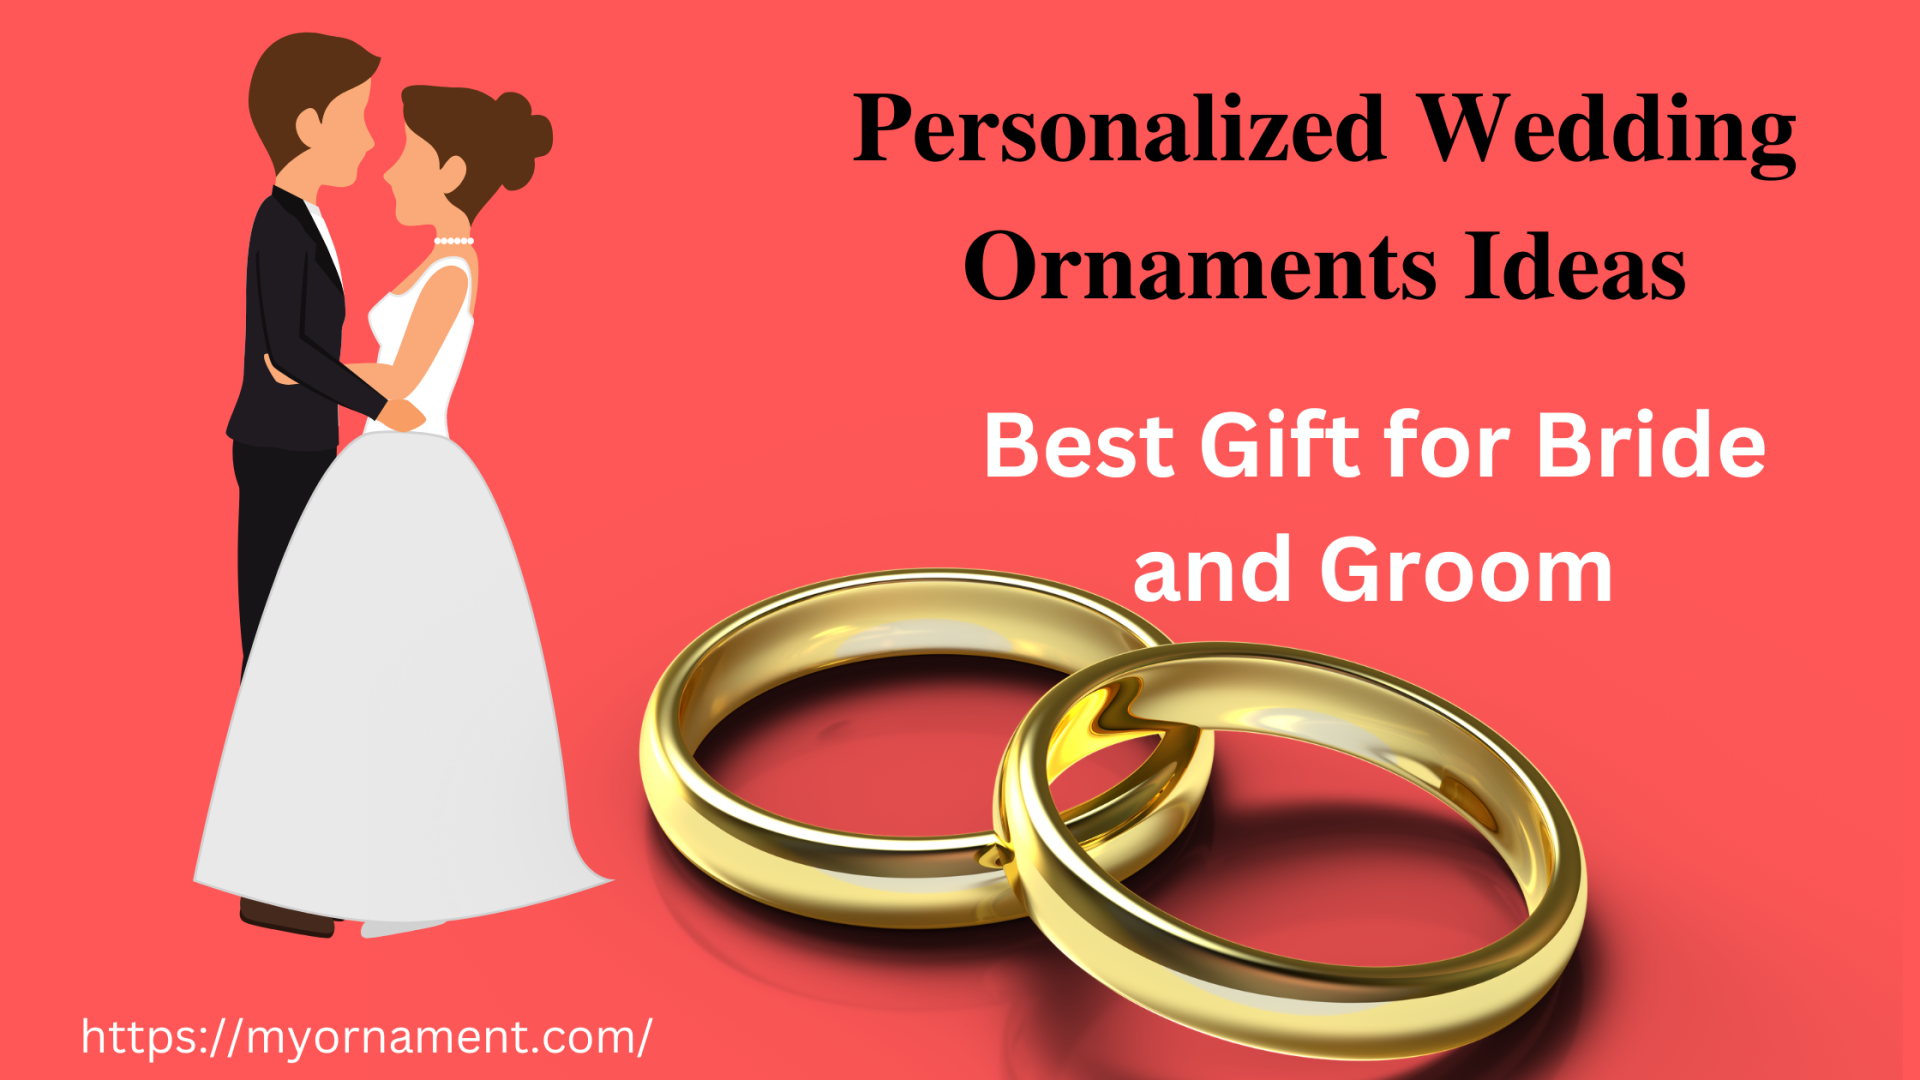 30 Best Groom Gifts from Bride to Give on Morning of the Wedding | Wedding  gifts for groom, Bride and groom gifts, Morning wedding